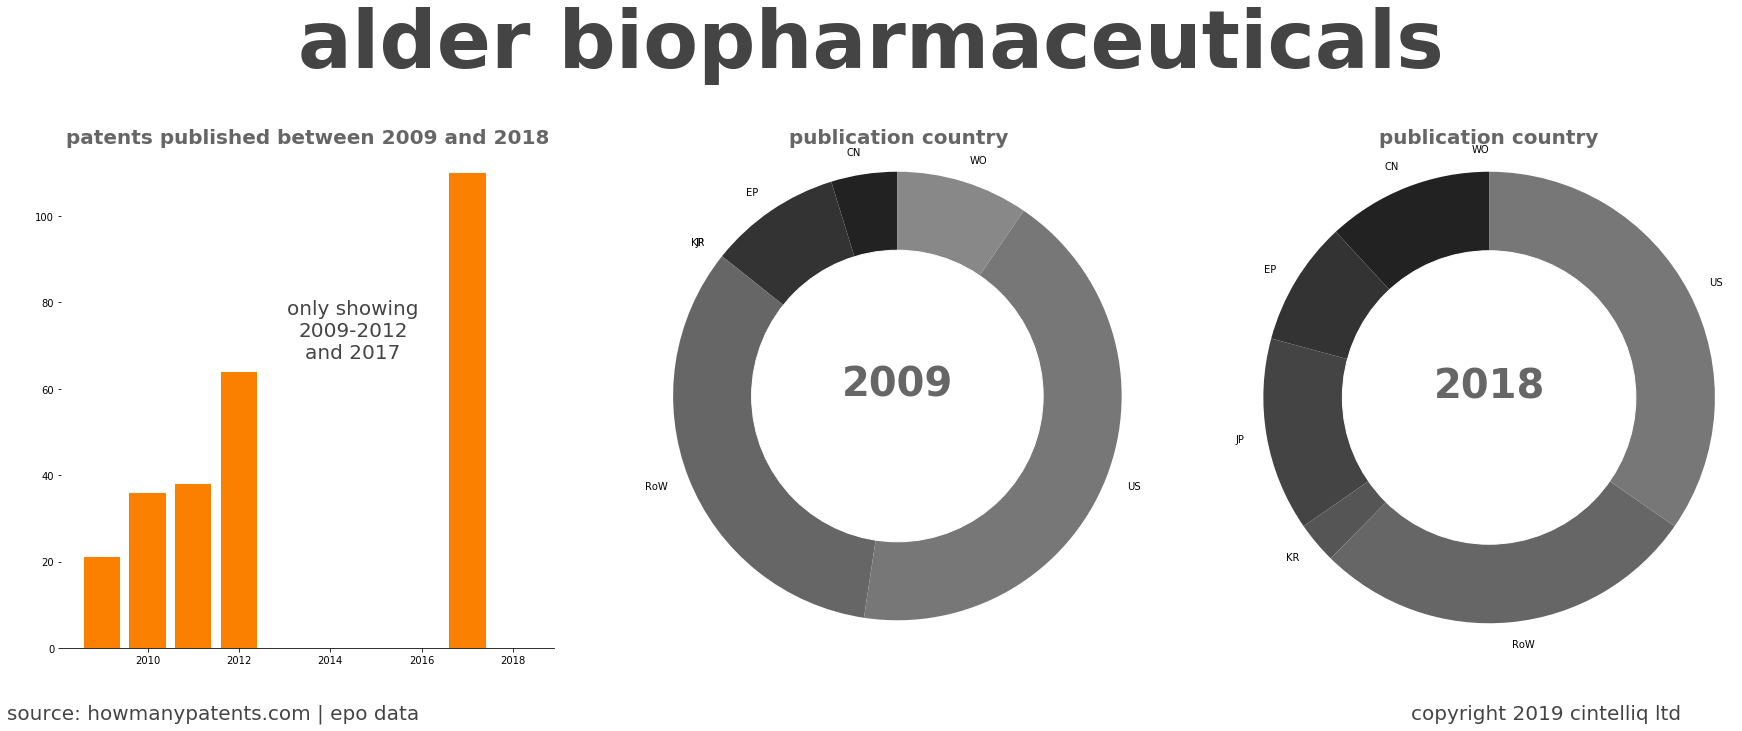 summary of patents for Alder Biopharmaceuticals